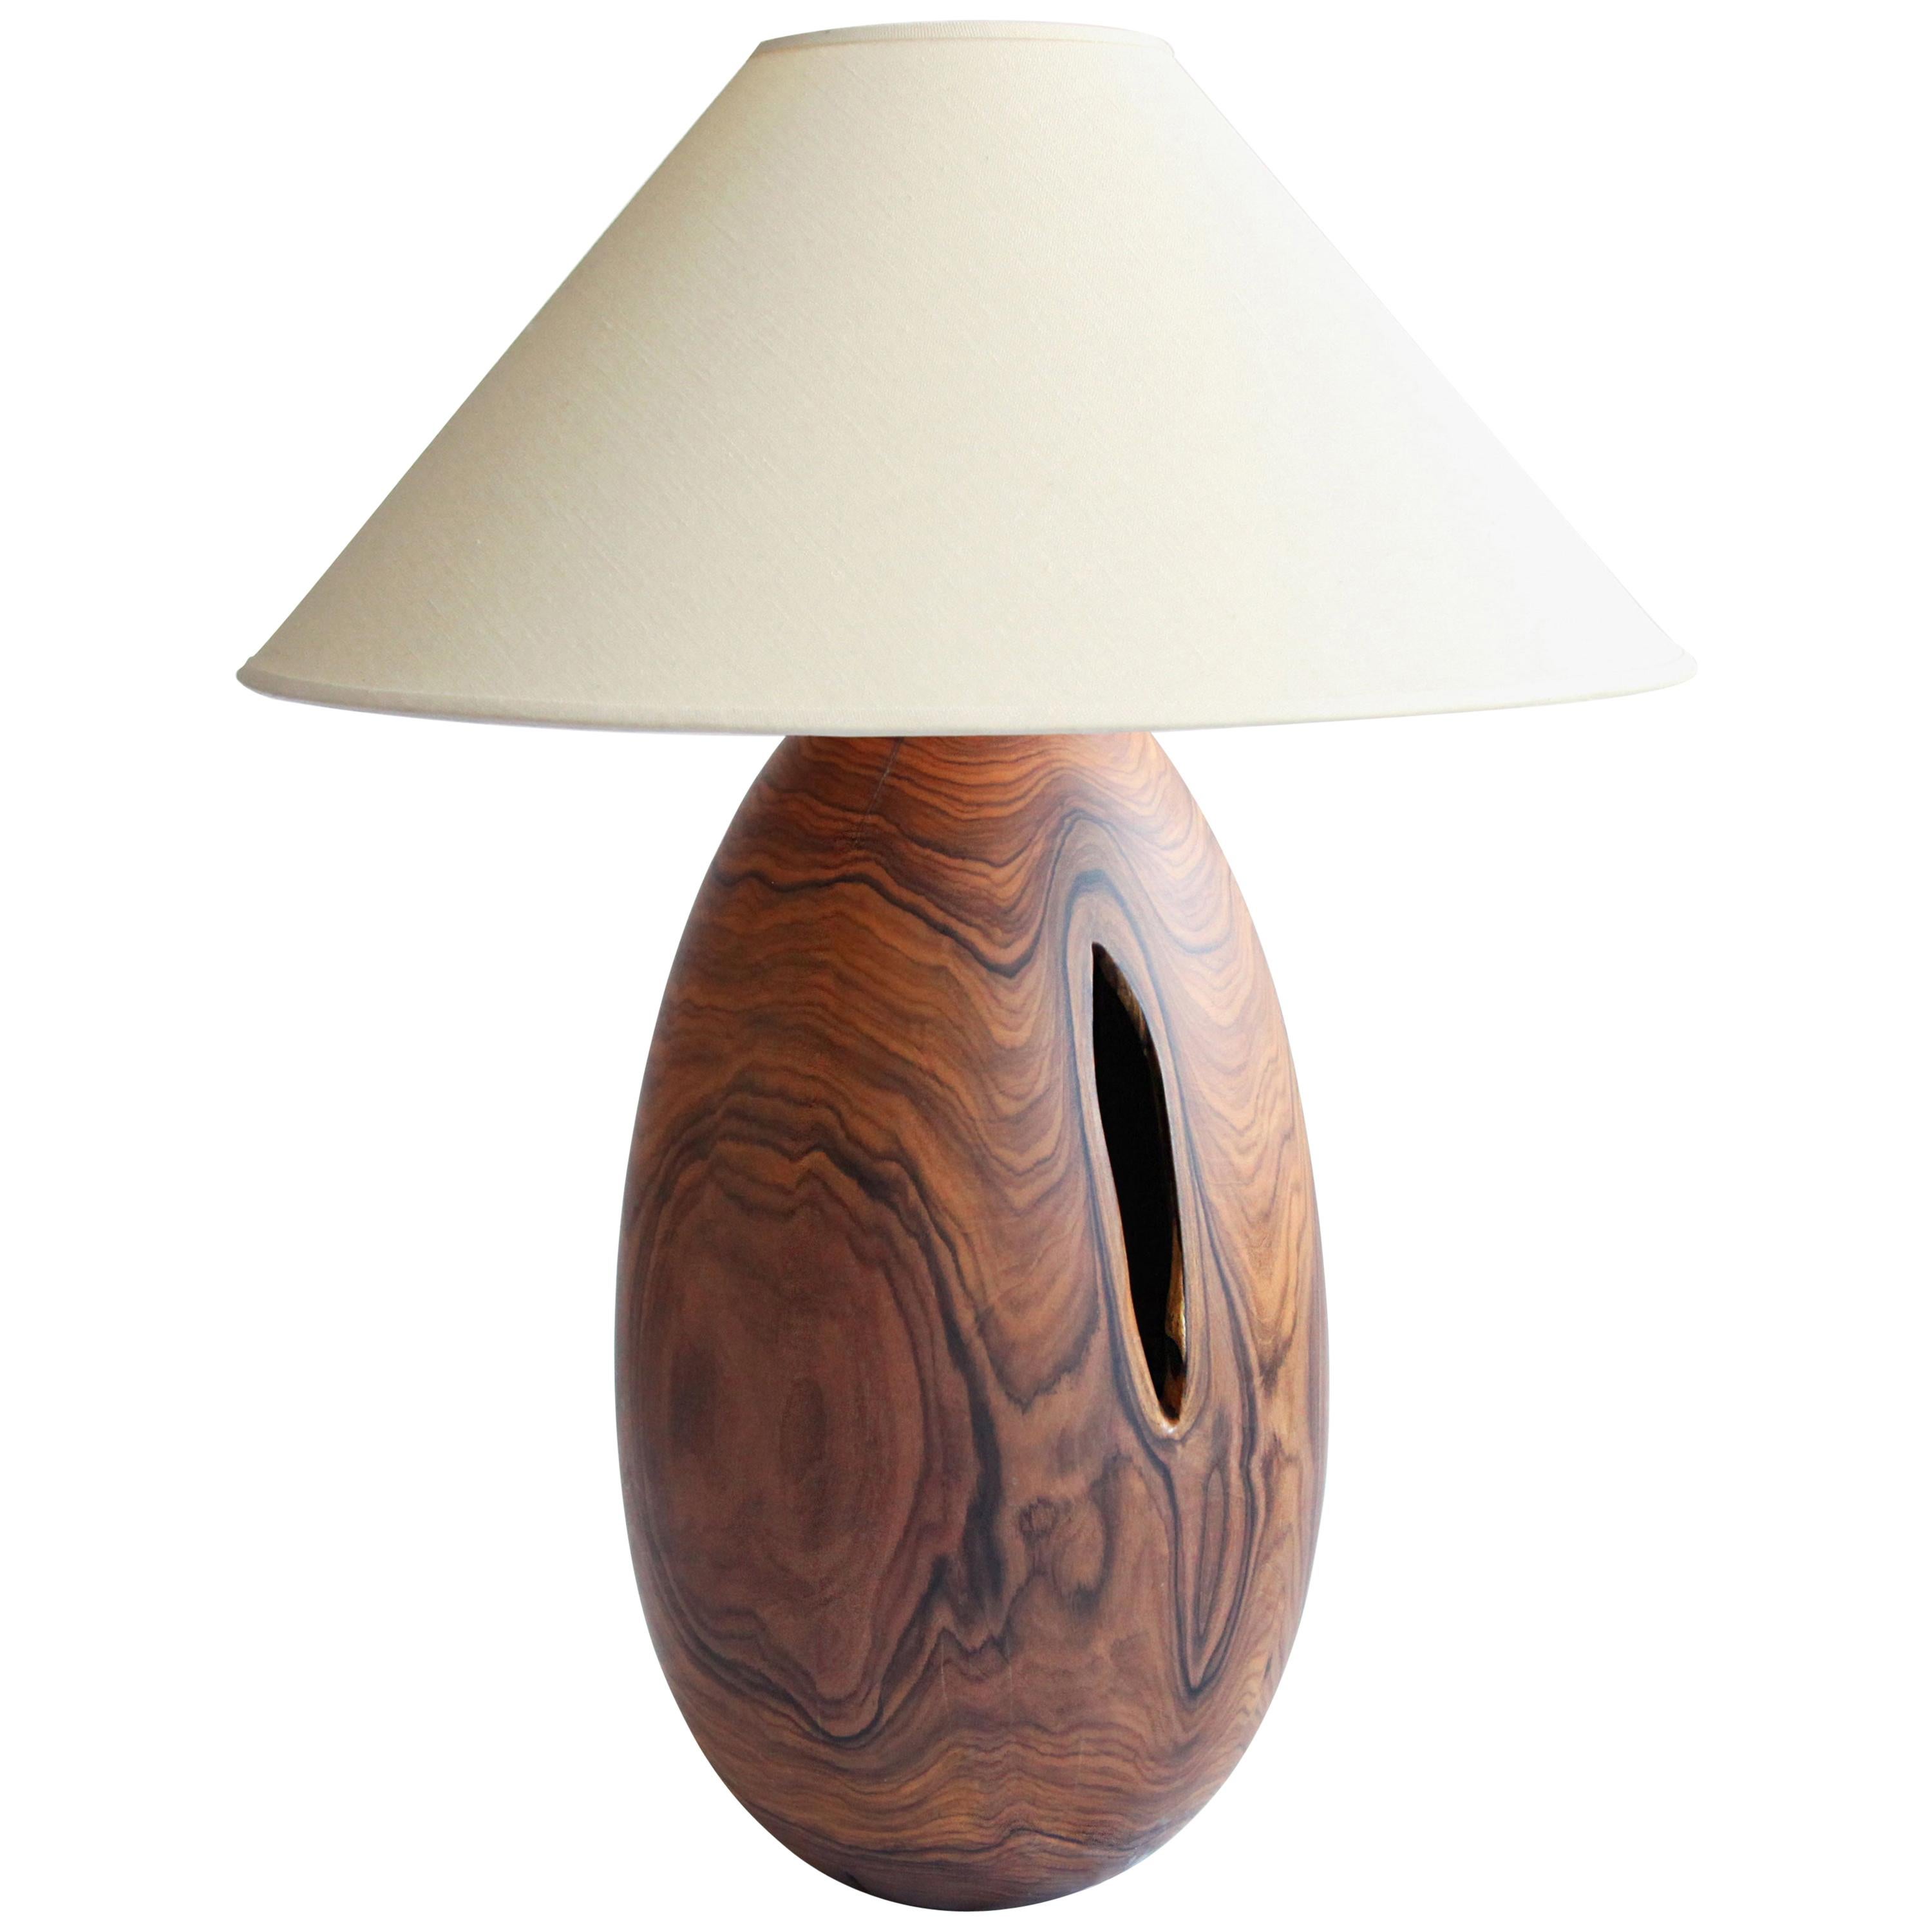 Tropical Hardwood Lamp and White Linen Shade, Extra Large, Árbol Collection, 45